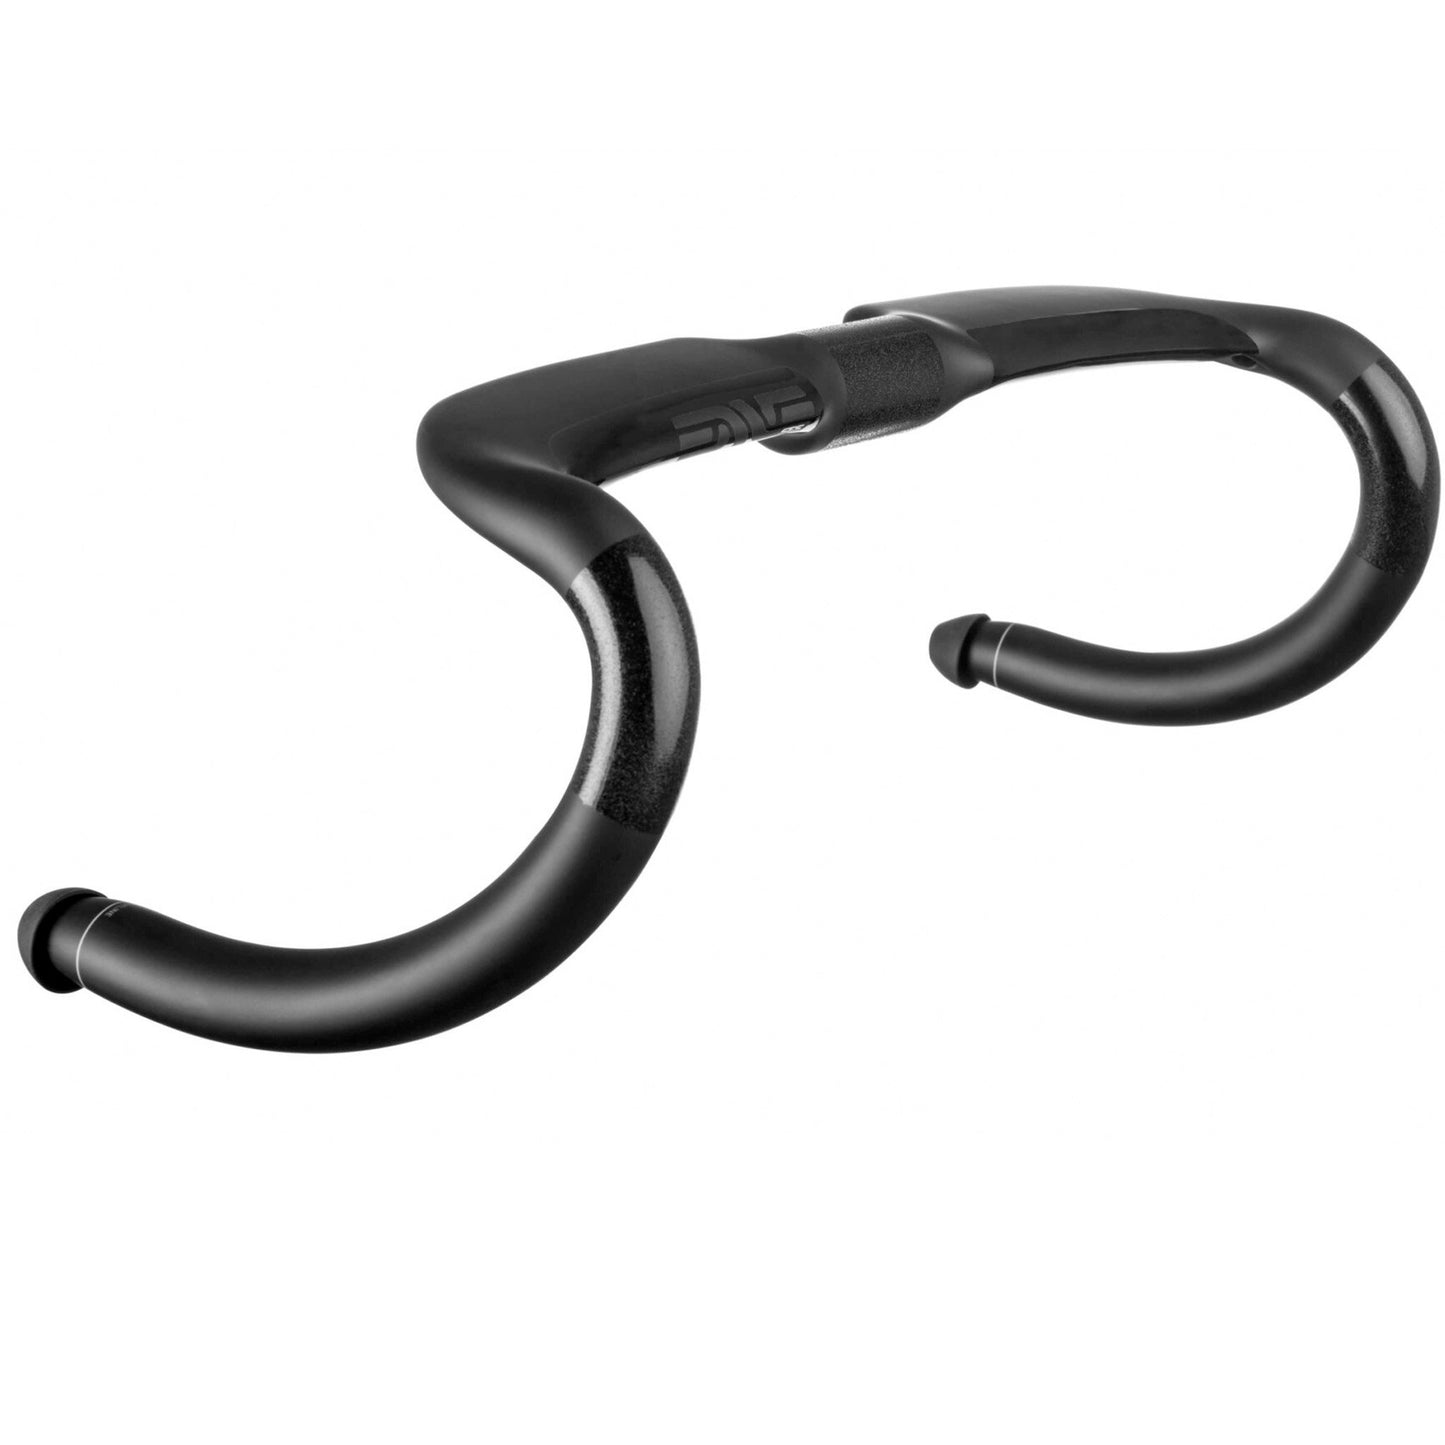 Enve Carbon Aero Road Bars 42cm Compact Drop buy online at Woolys Wheels bike shop Sydney with free delivery